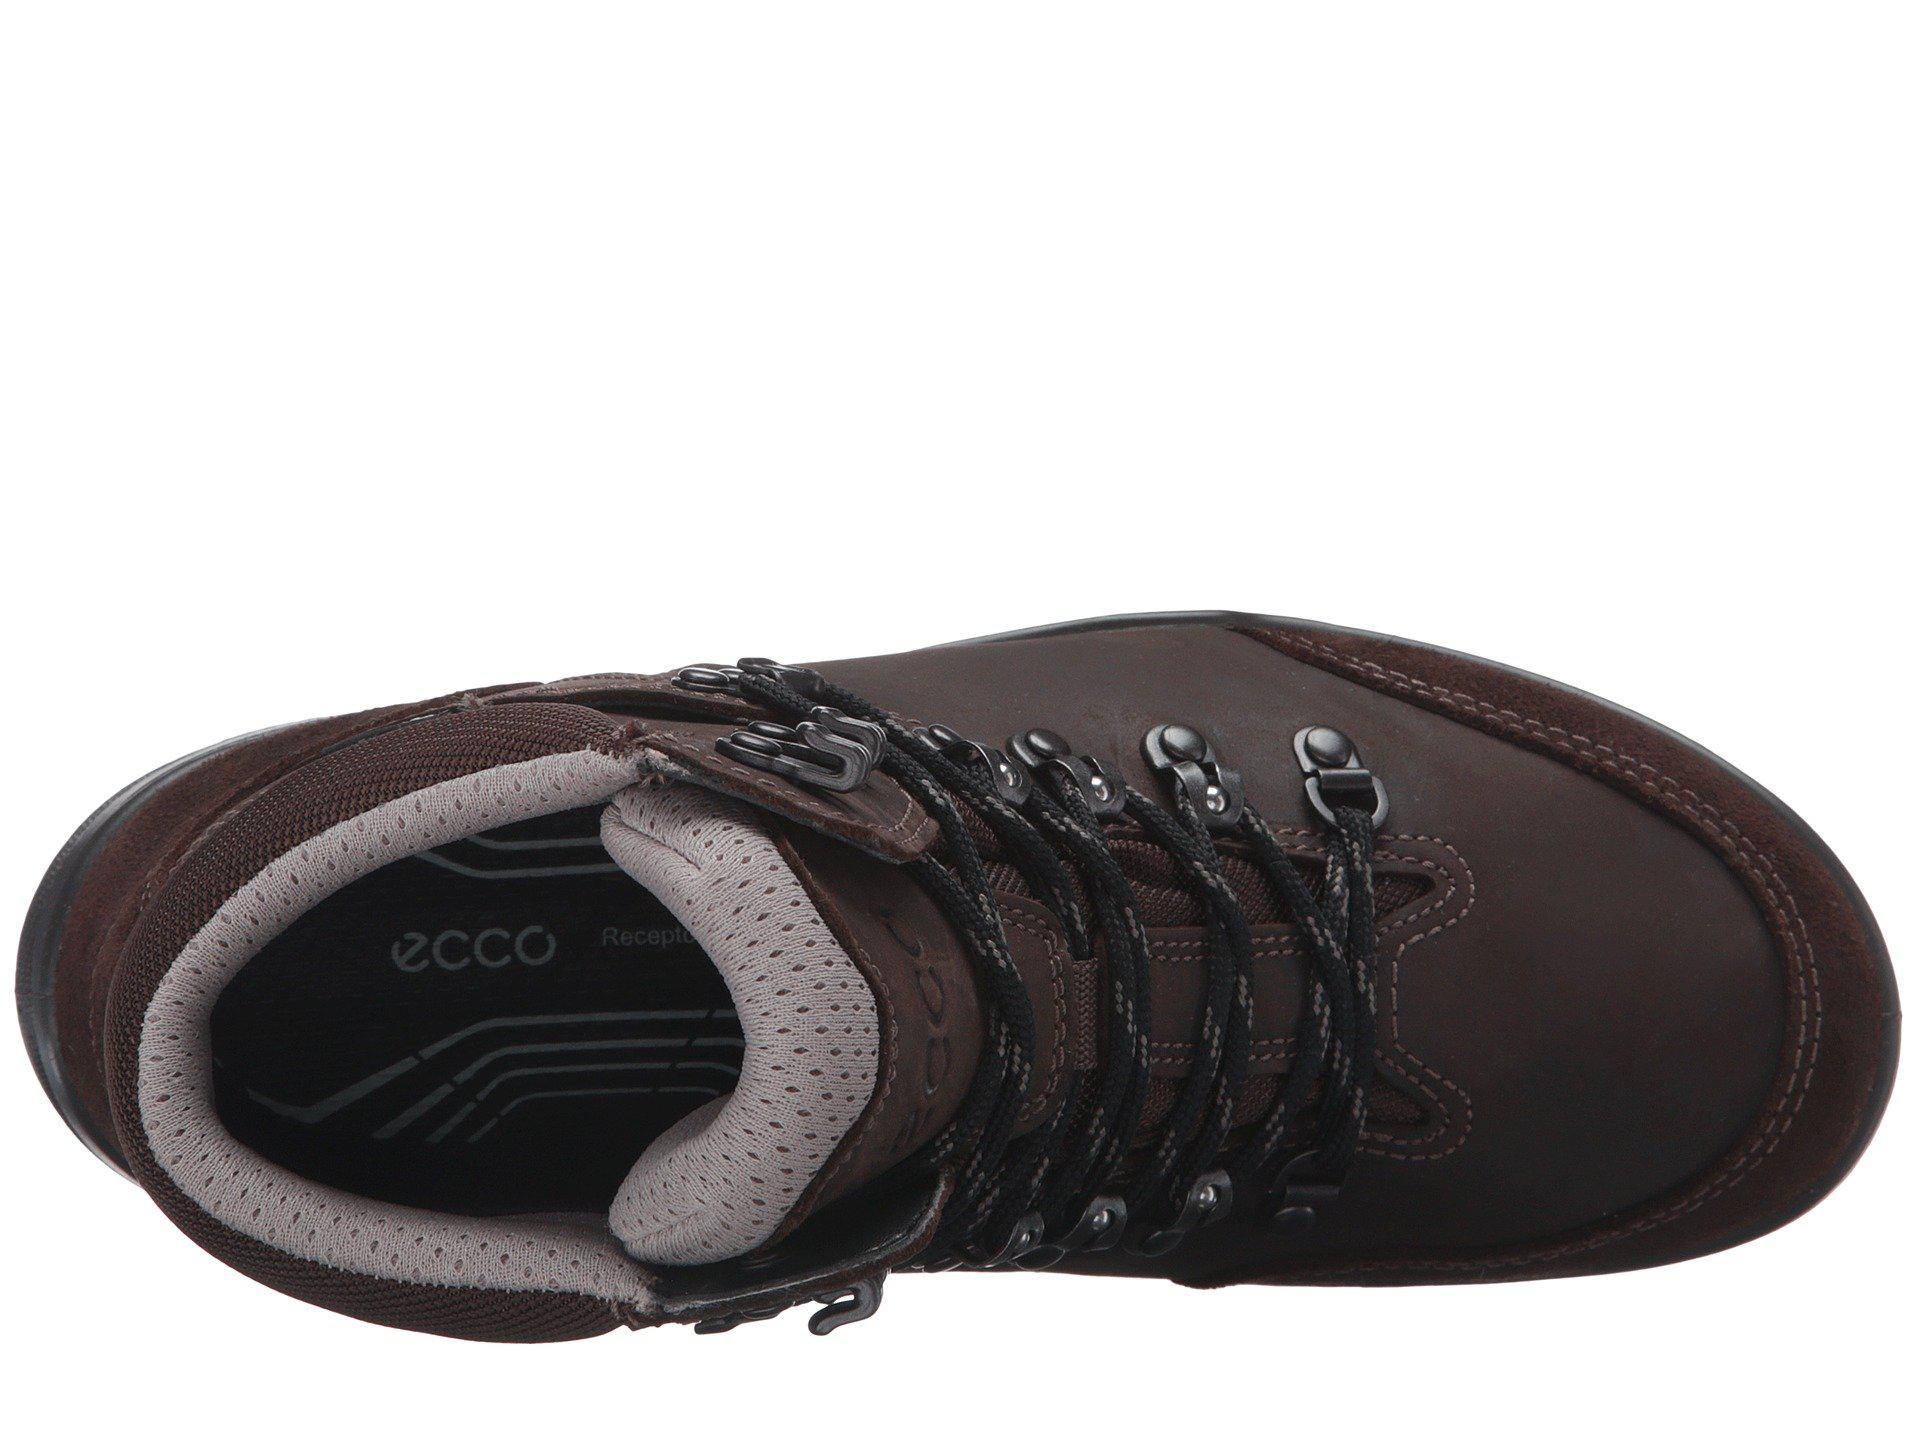 Ecco Leather Xpedition Iii Ladies Low Rise Hiking Shoes in Coffee (Brown) -  Lyst